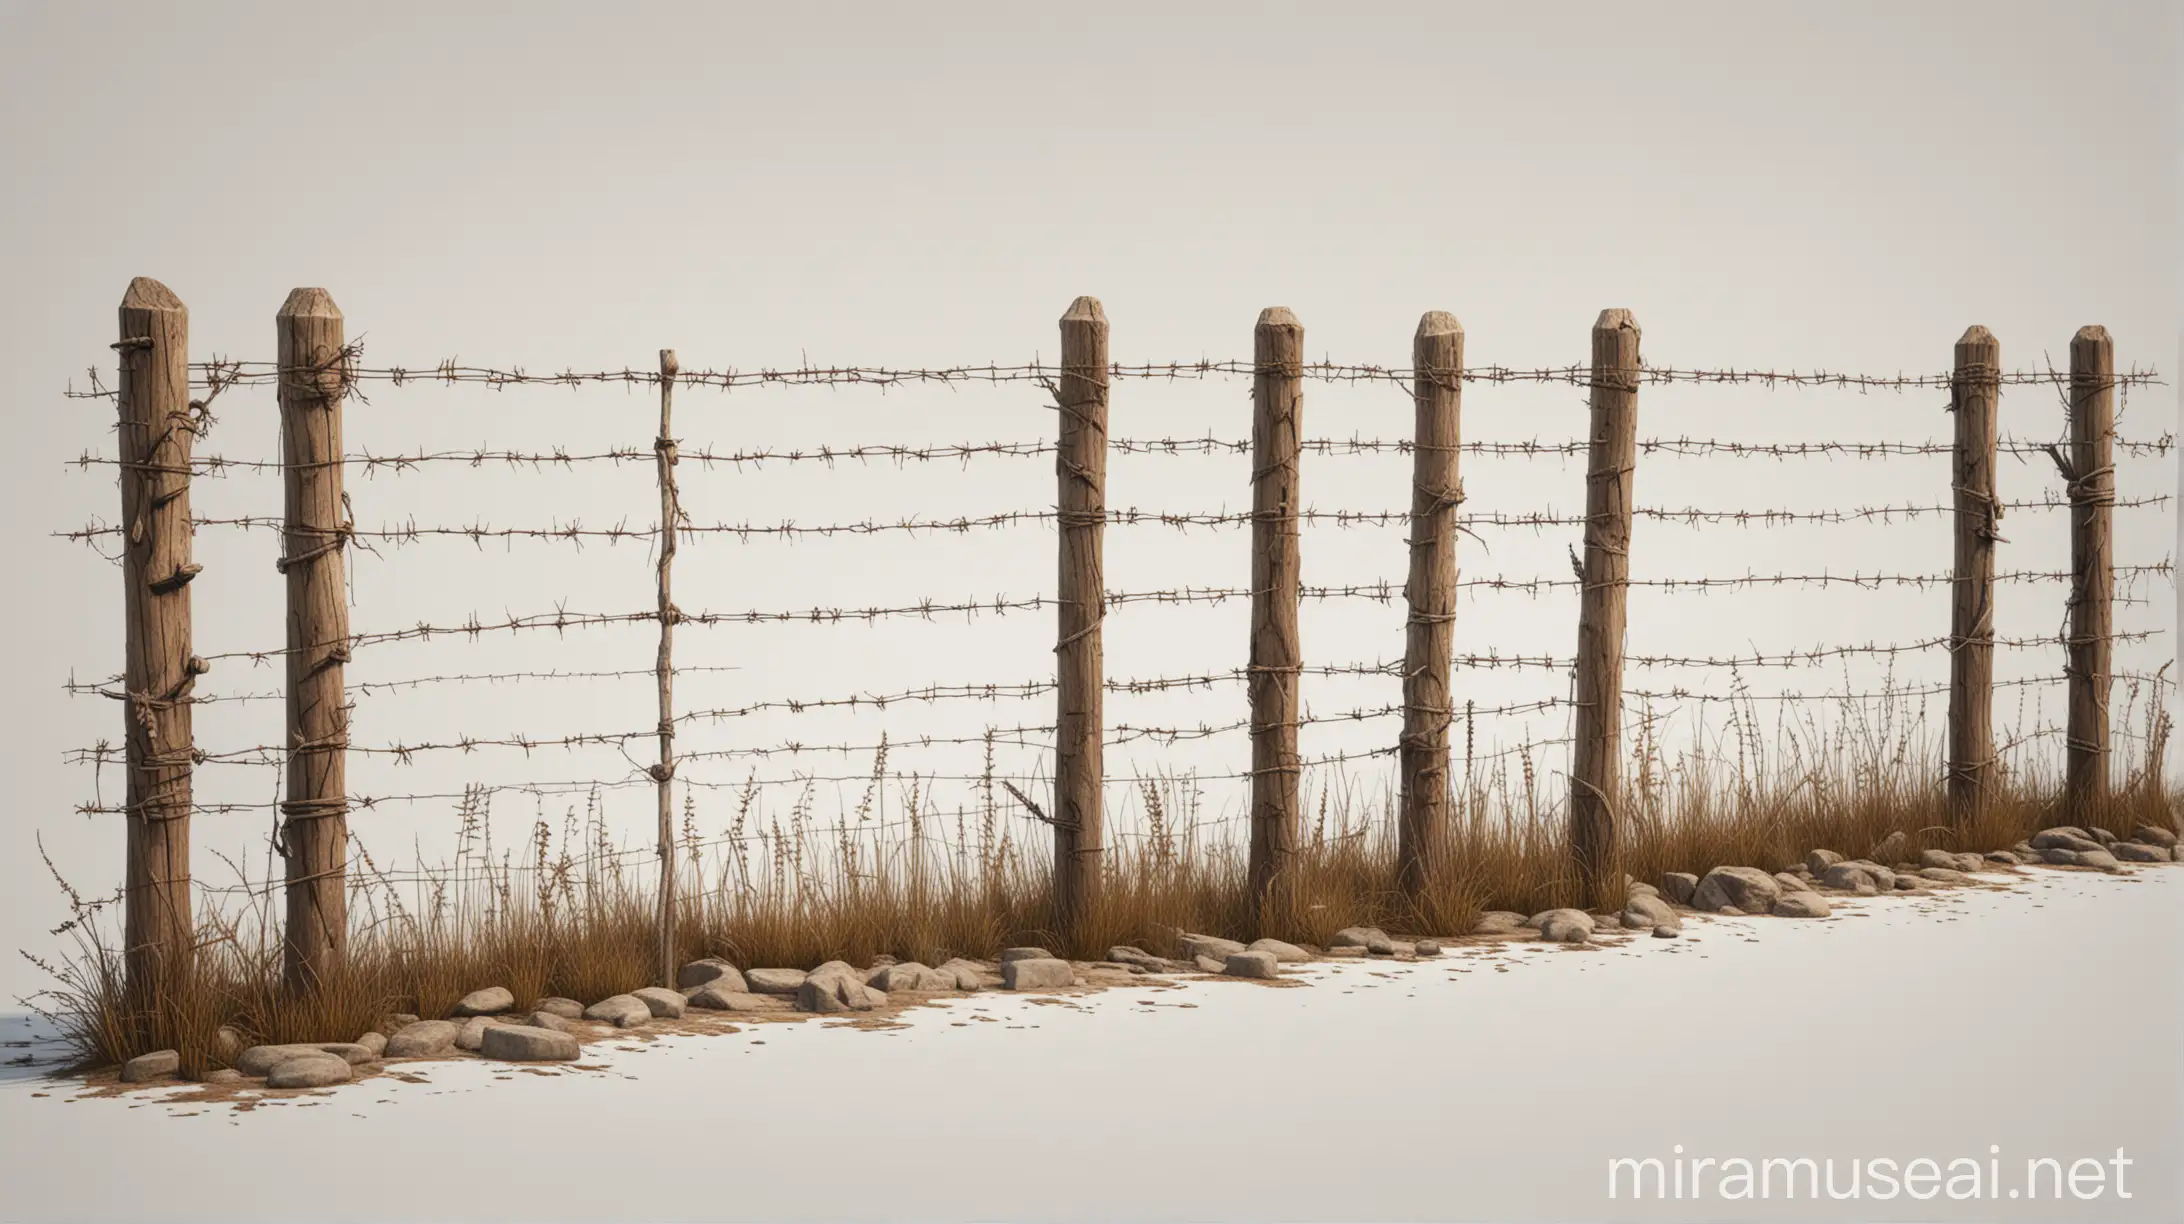 Realistic Barbed Wire Fence with Rounded Wooden Posts